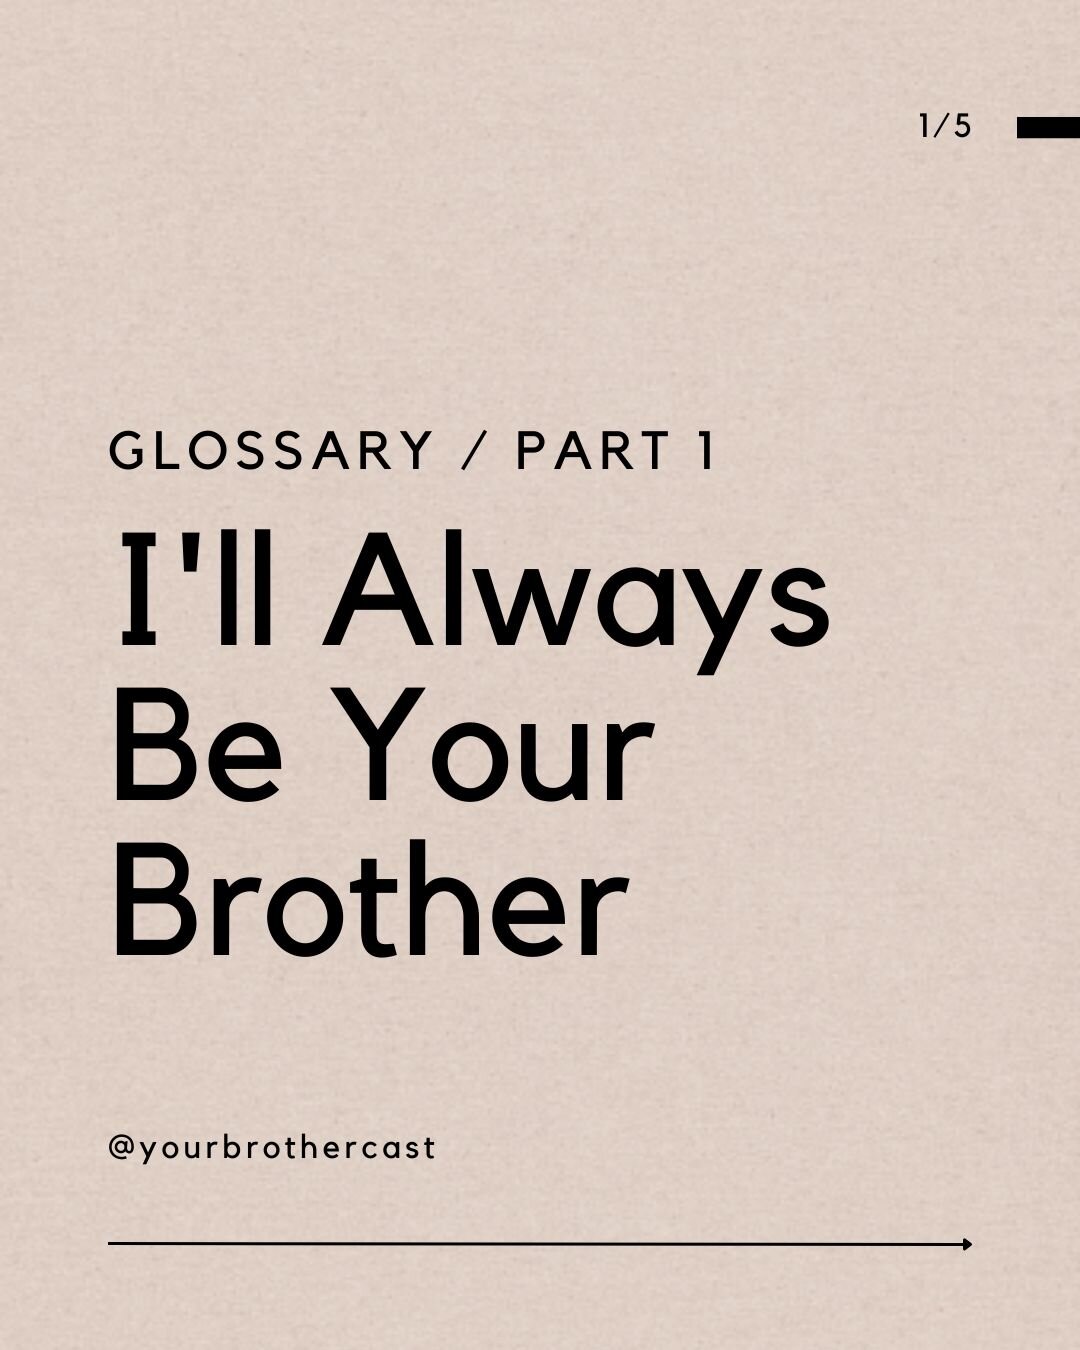 🔍 Introducing I'll Always Be Your Brother Glossary! 

Step into the world of the I'll Always Be Your Brother podcast with our comprehensive glossary. Familiarize yourself in the profound meanings behind key terms like Rastafari, Zion, Coptic, Jah, B